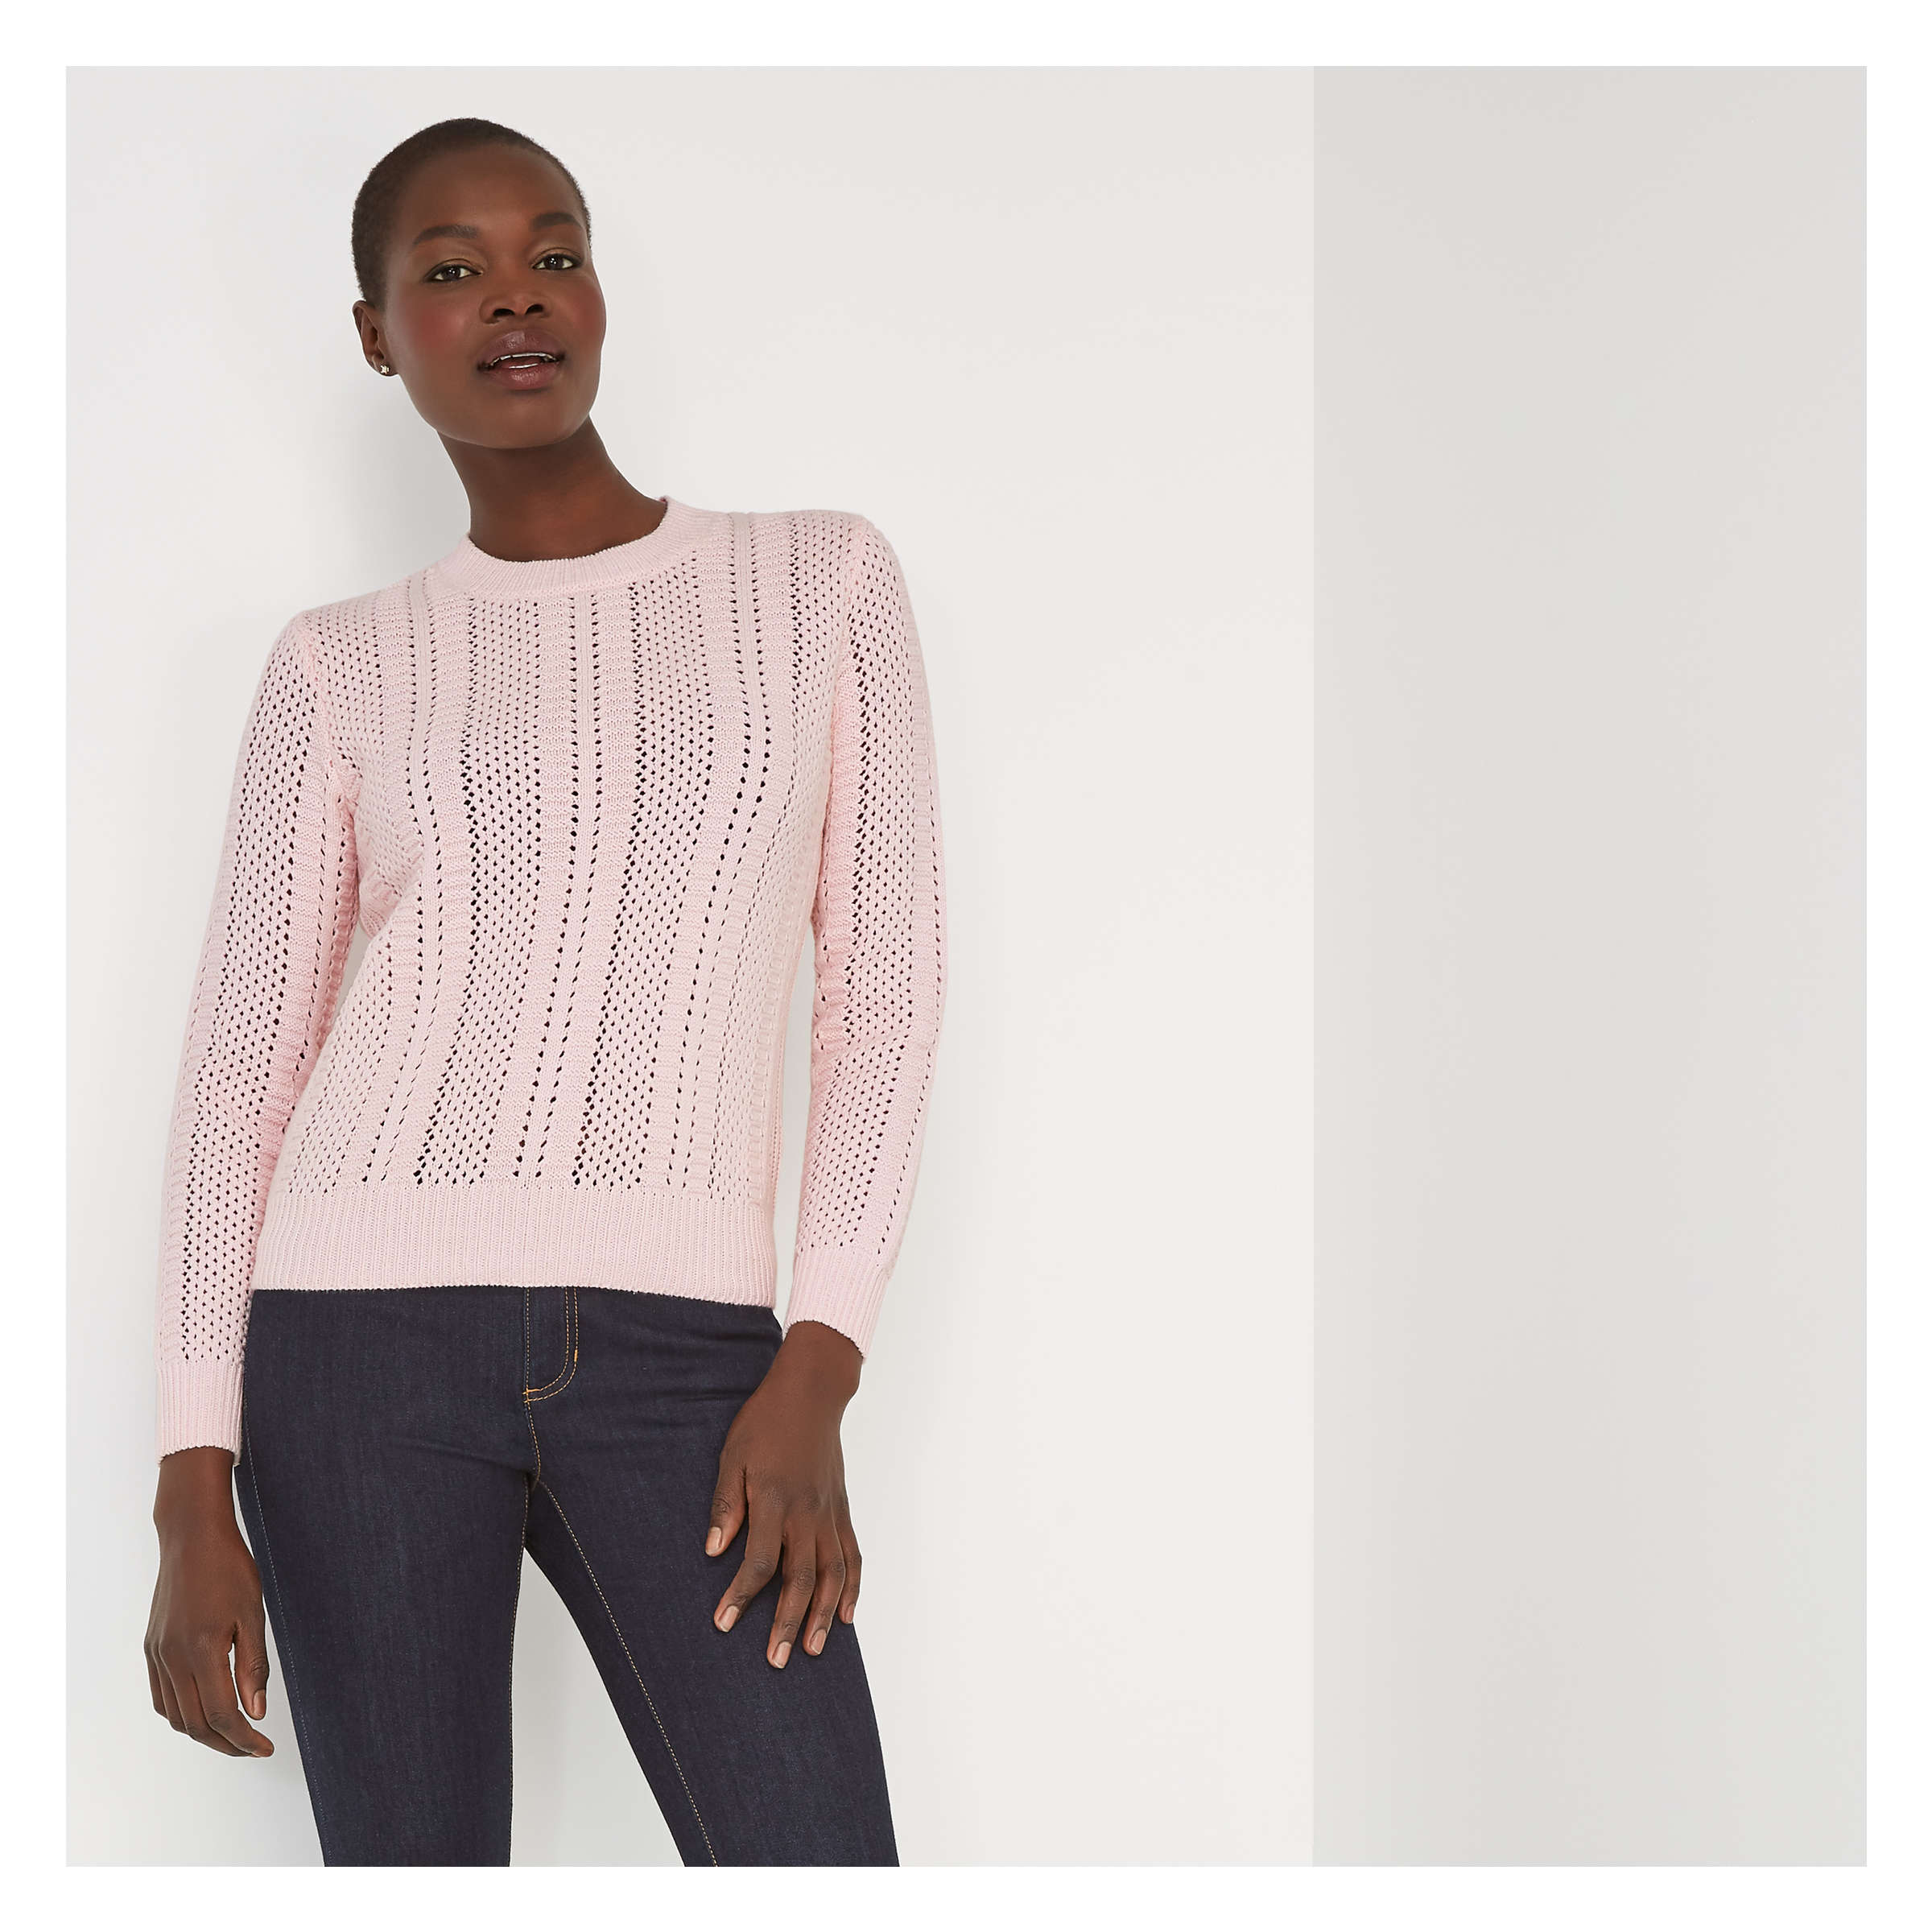 Open Stitch Sweater in Powder Pink from 